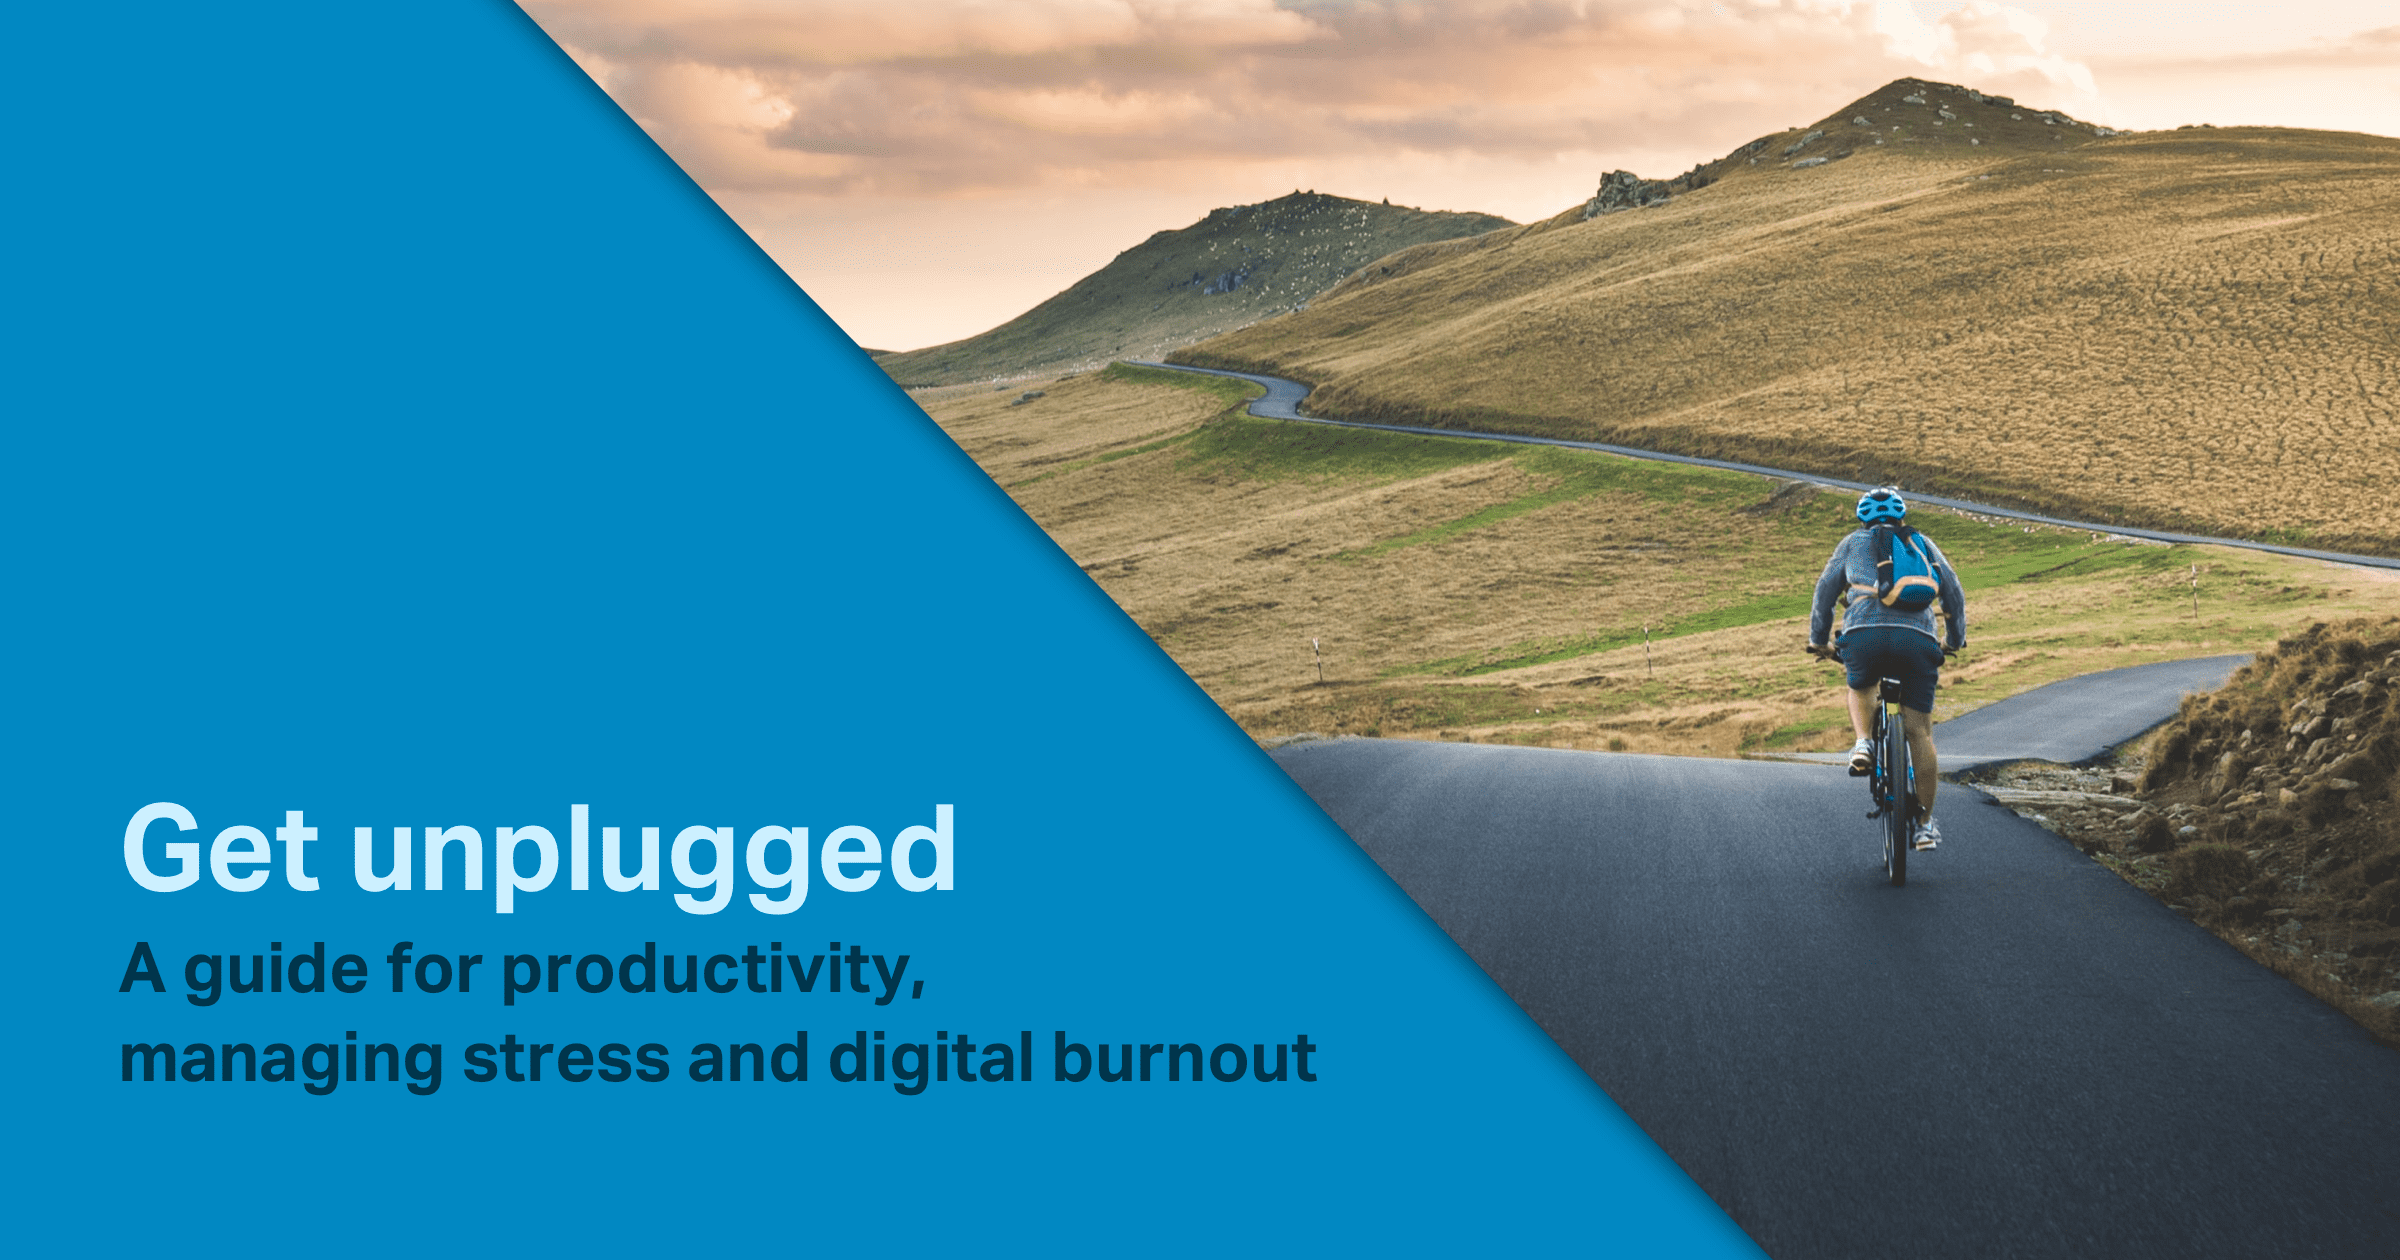 Get unplugged - A guide for productivity, managing stress and digital burnout